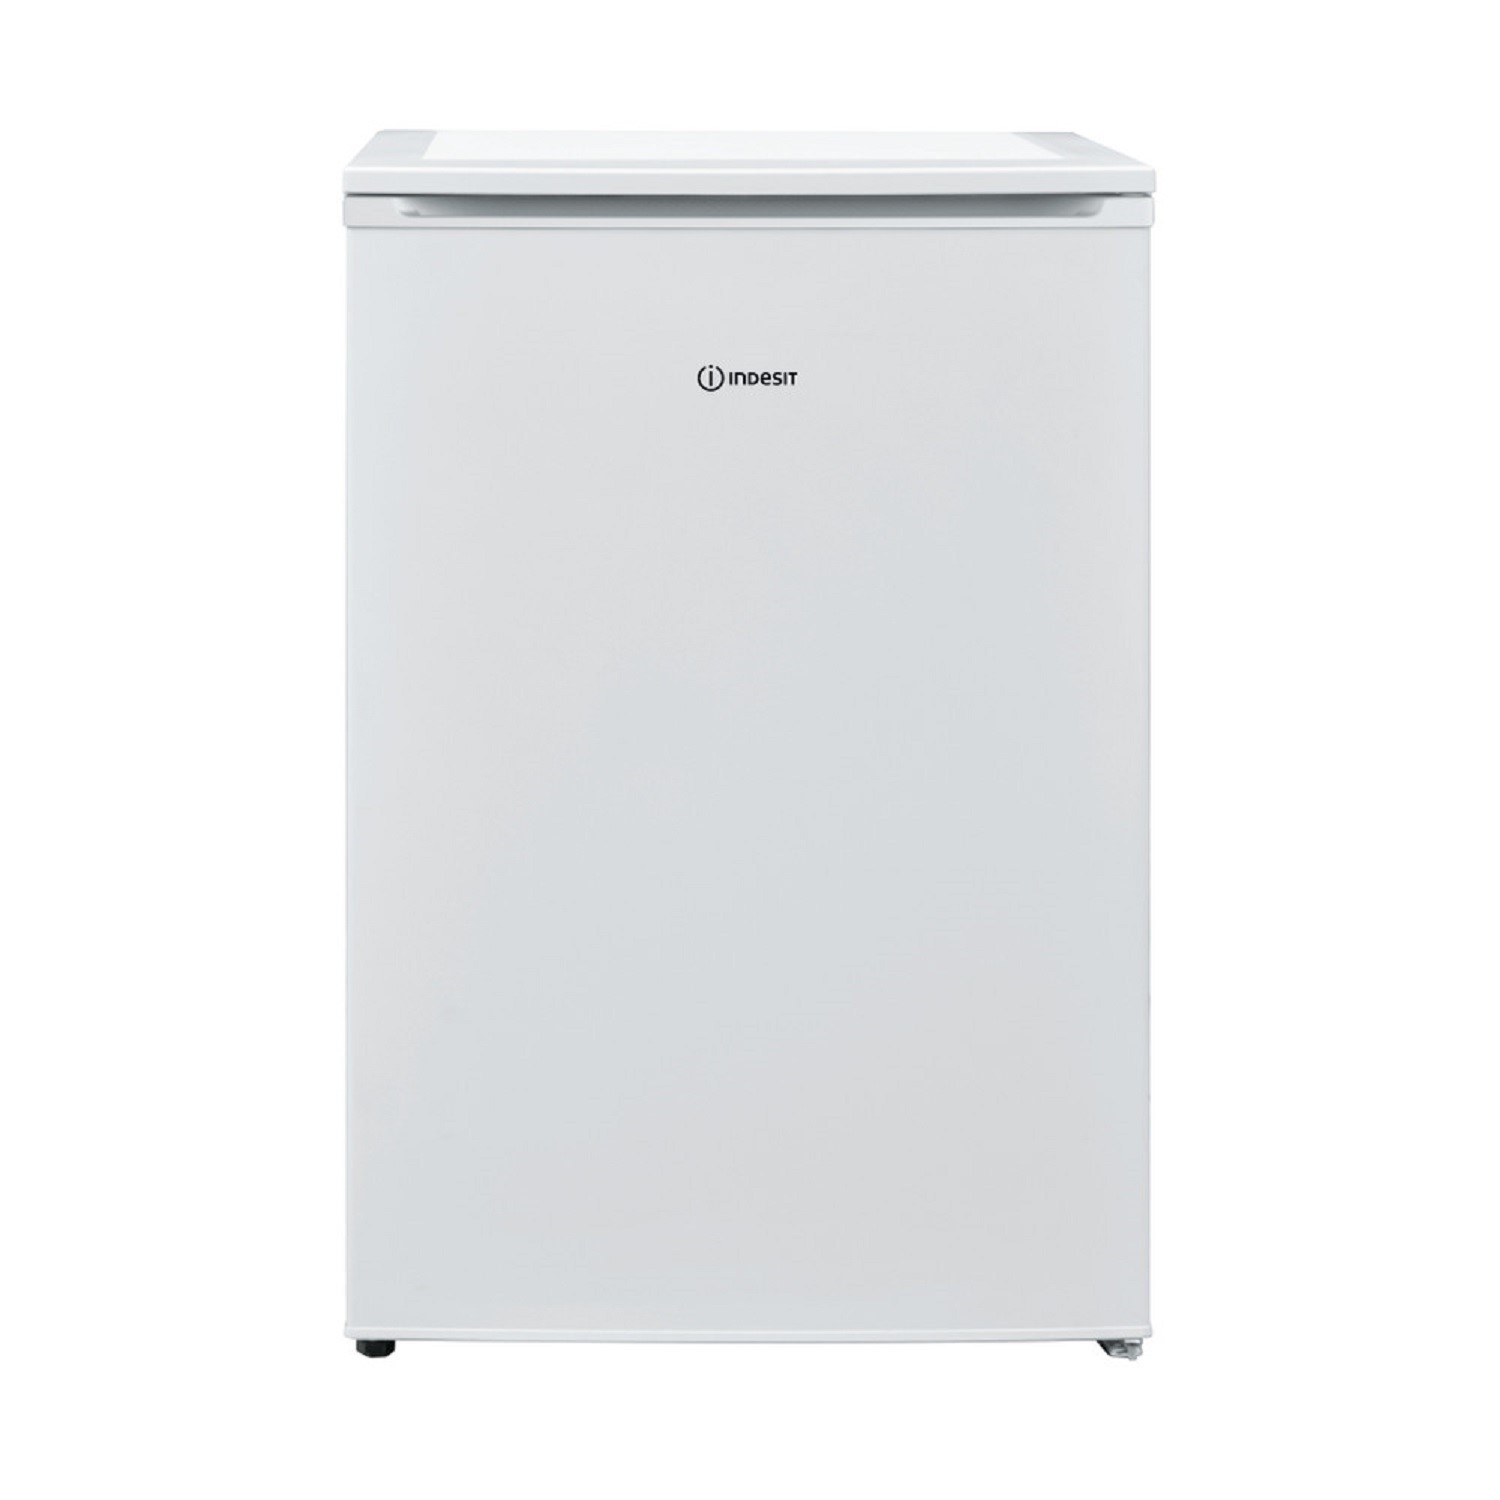 Photos - Other for Computer Indesit 121 Litre Under Counter Freestanding Fridge - White F167080 